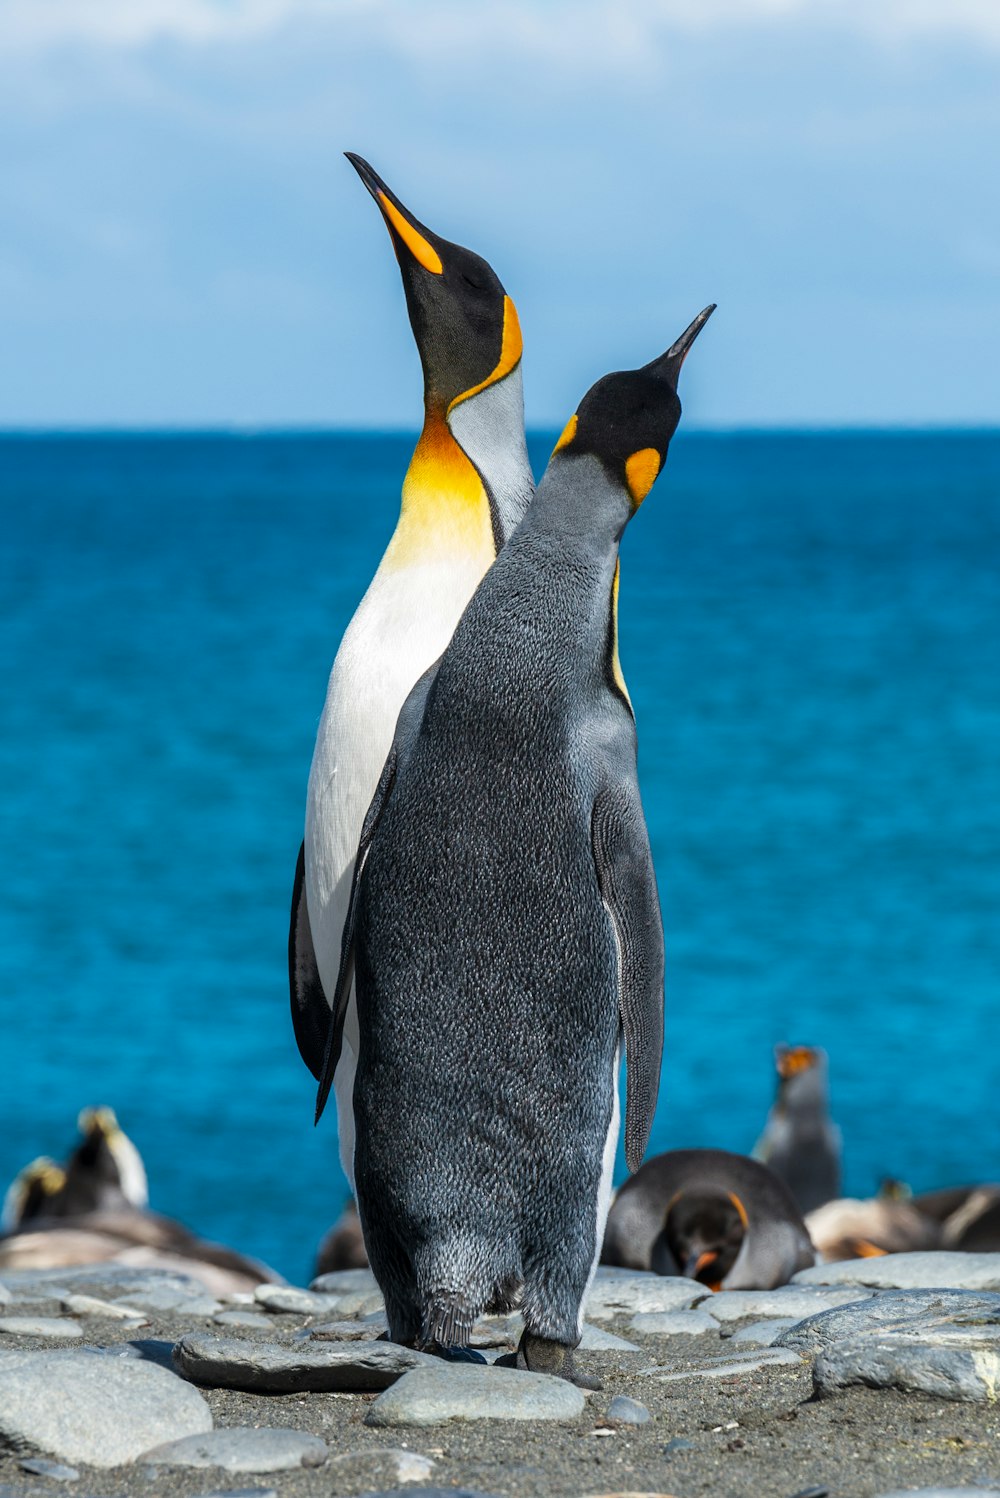 two penguins on seashore during daytime